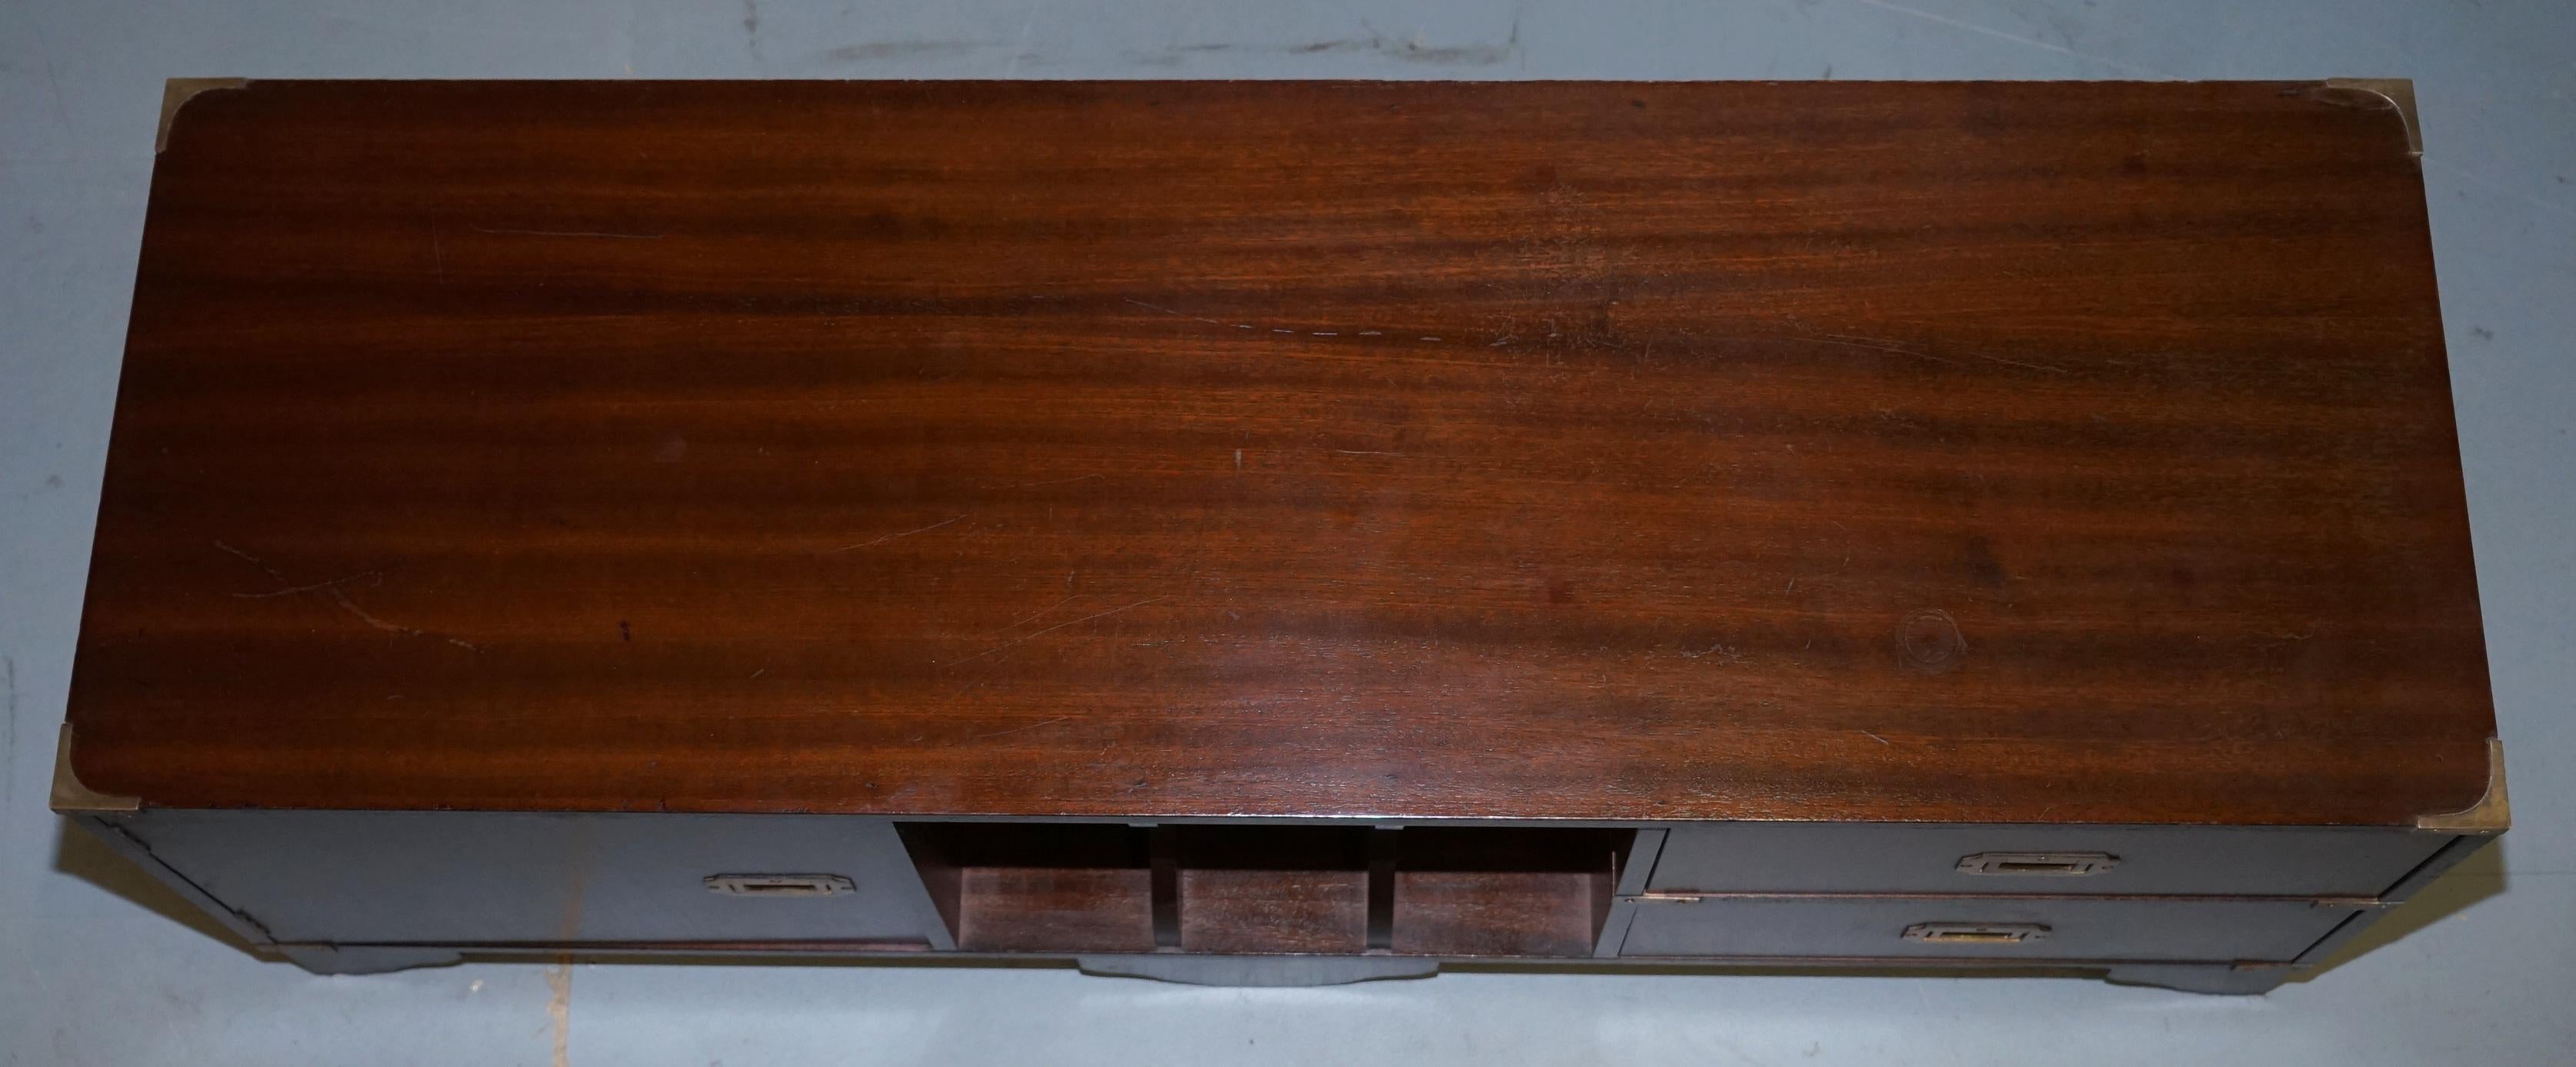 English Rare Military Campaign Hardwood Record Player TV Media Stand Table with Drawers